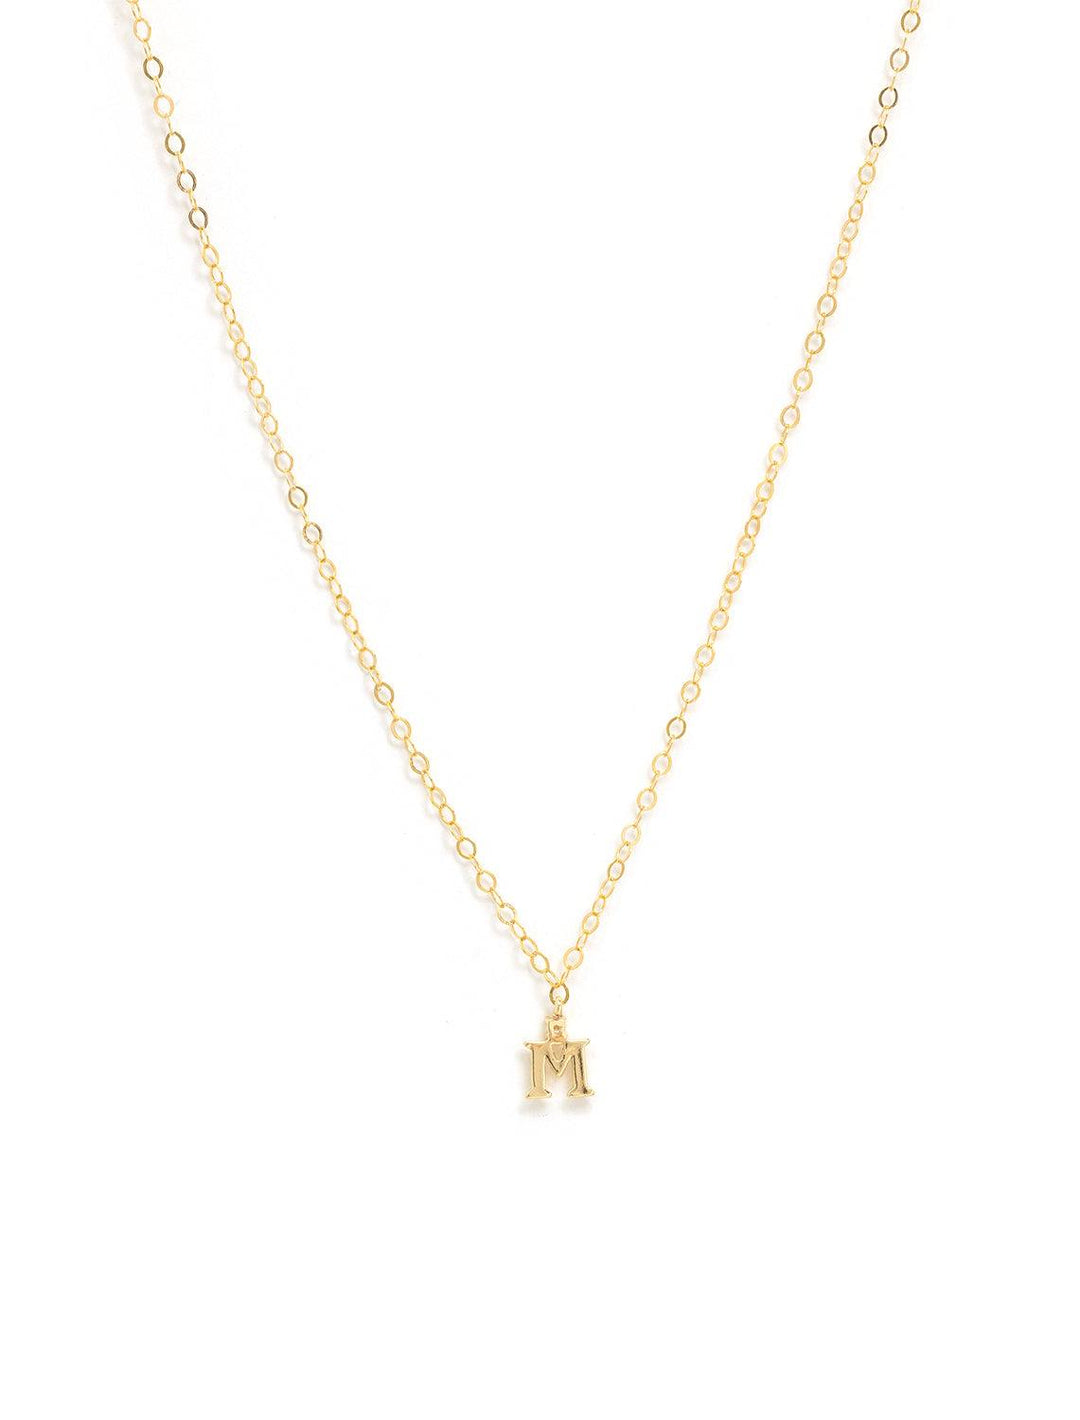 Marit Rae initial and cz necklace in gold | M - Twigs